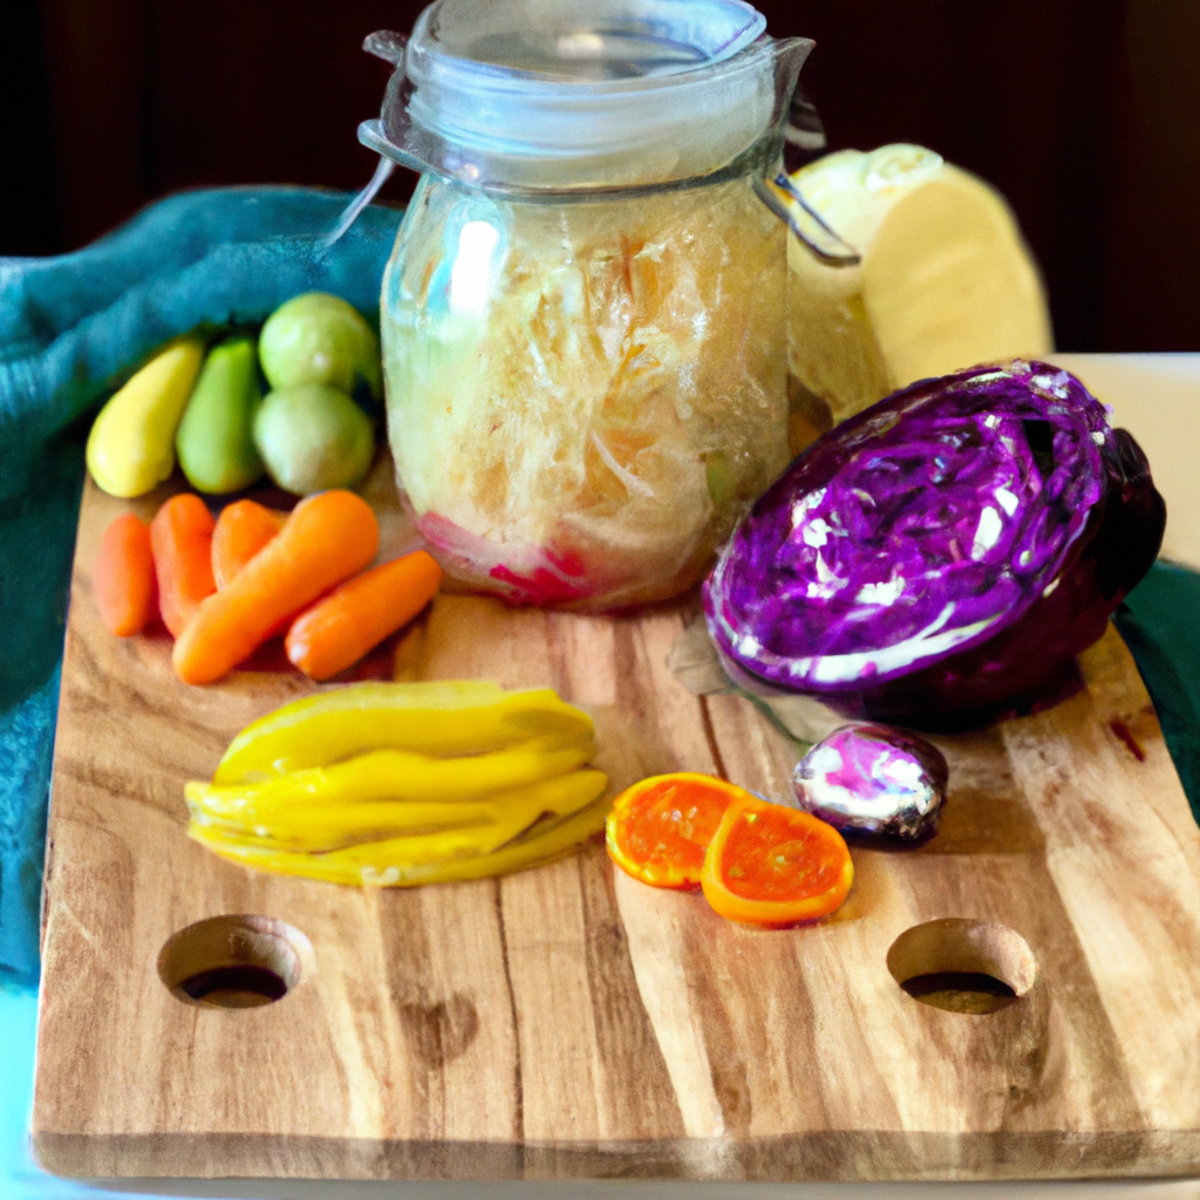 The photo depicts a wooden cutting board with a variety of colorful fruits and vegetables arranged neatly on top. In the foreground, there is a glass jar filled with homemade sauerkraut, showcasing the importance of incorporating probiotics into one's diet for optimal gut health. The vibrant colors of the produce and the natural textures of the wooden board create a warm and inviting atmosphere, emphasizing the benefits of a healthy and balanced diet.